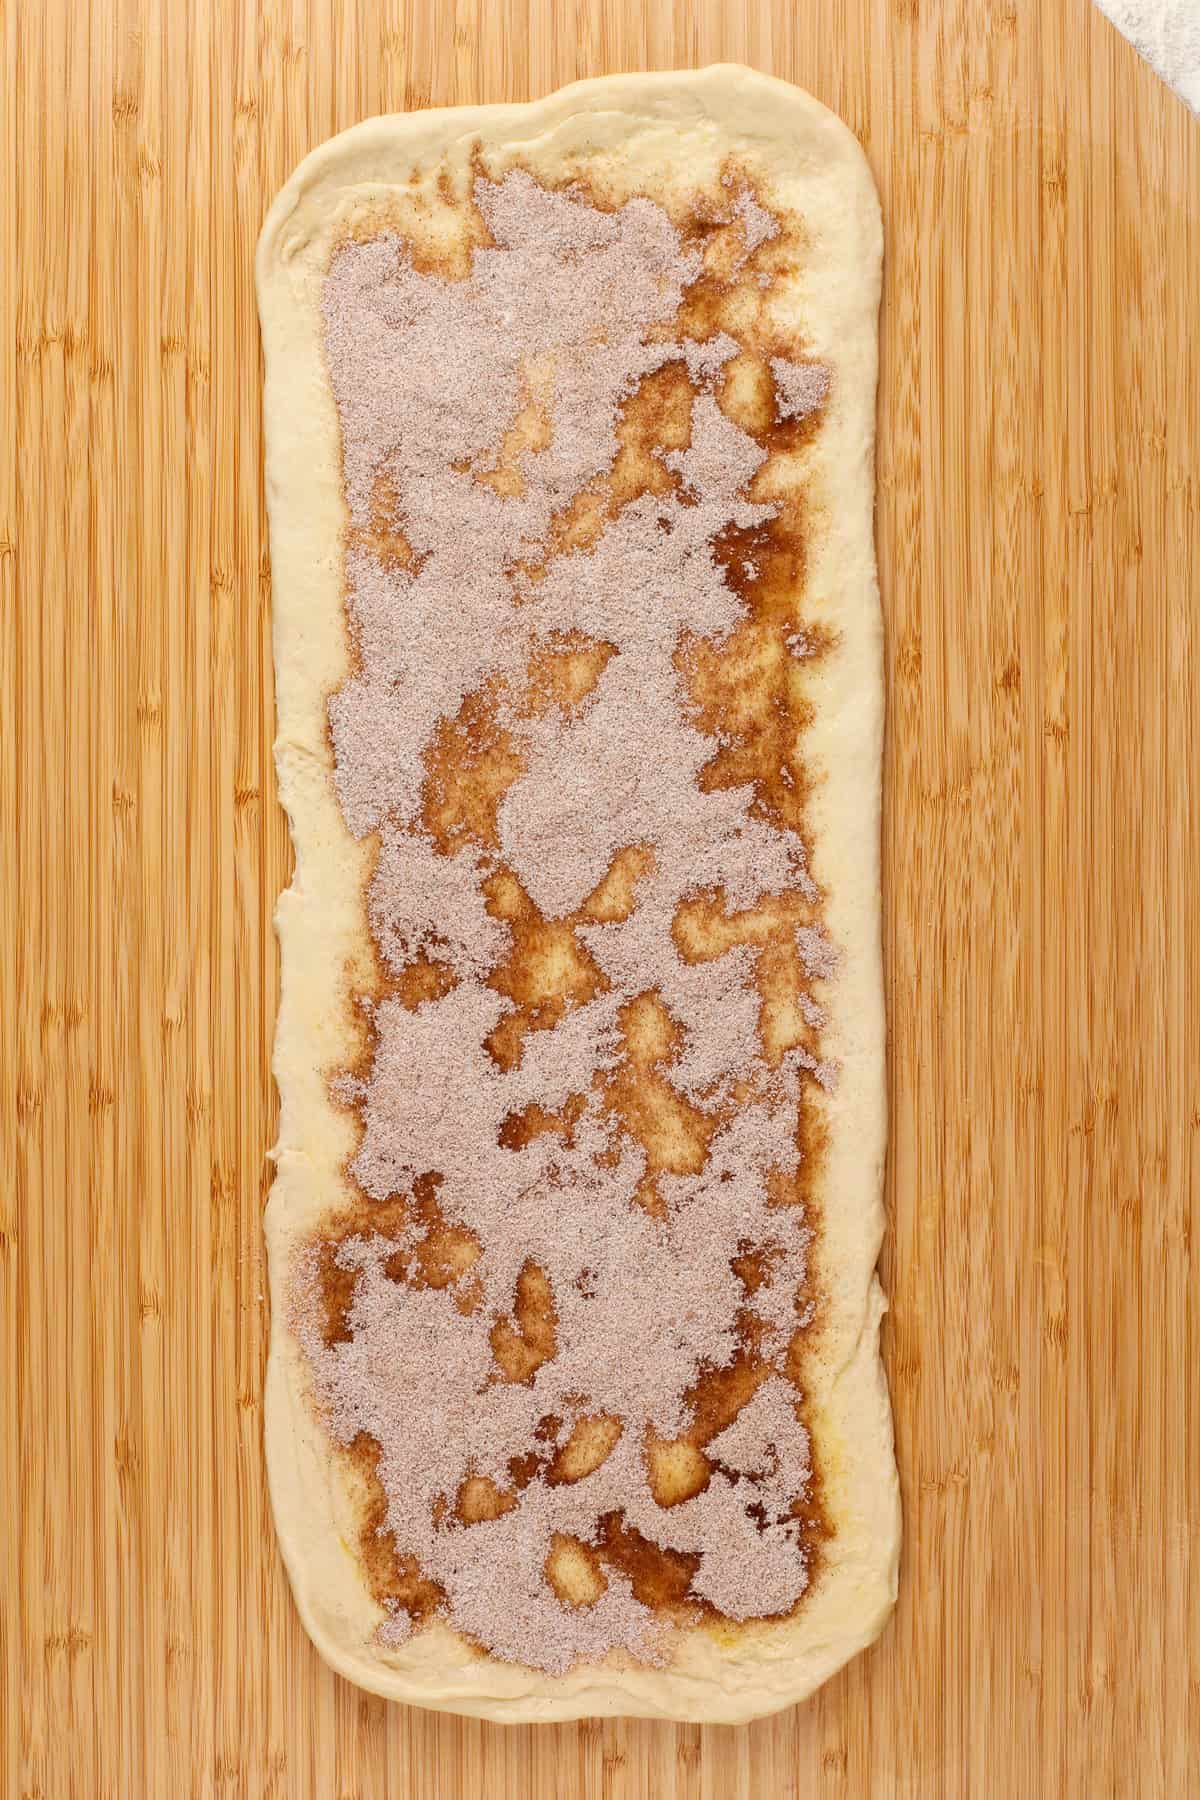 Dough rolled into a long rectangle and topped with cinnamon and sugar.